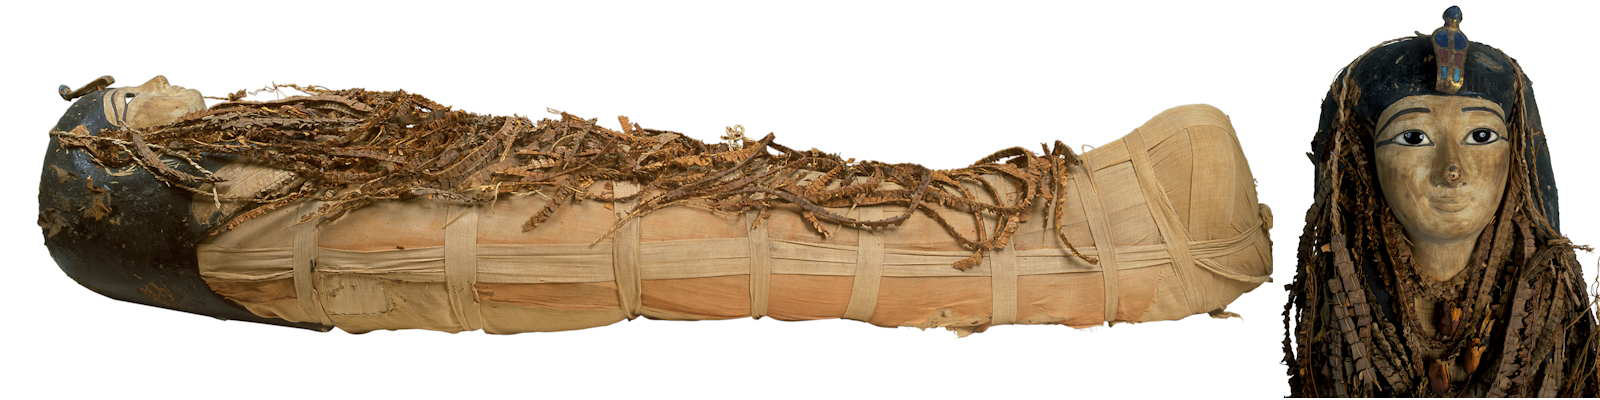 Right lateral view of the mummy of Amenhotep I shows the body fully wrapped in linen, covered from head to foot with floral garlands and wearing a head mask